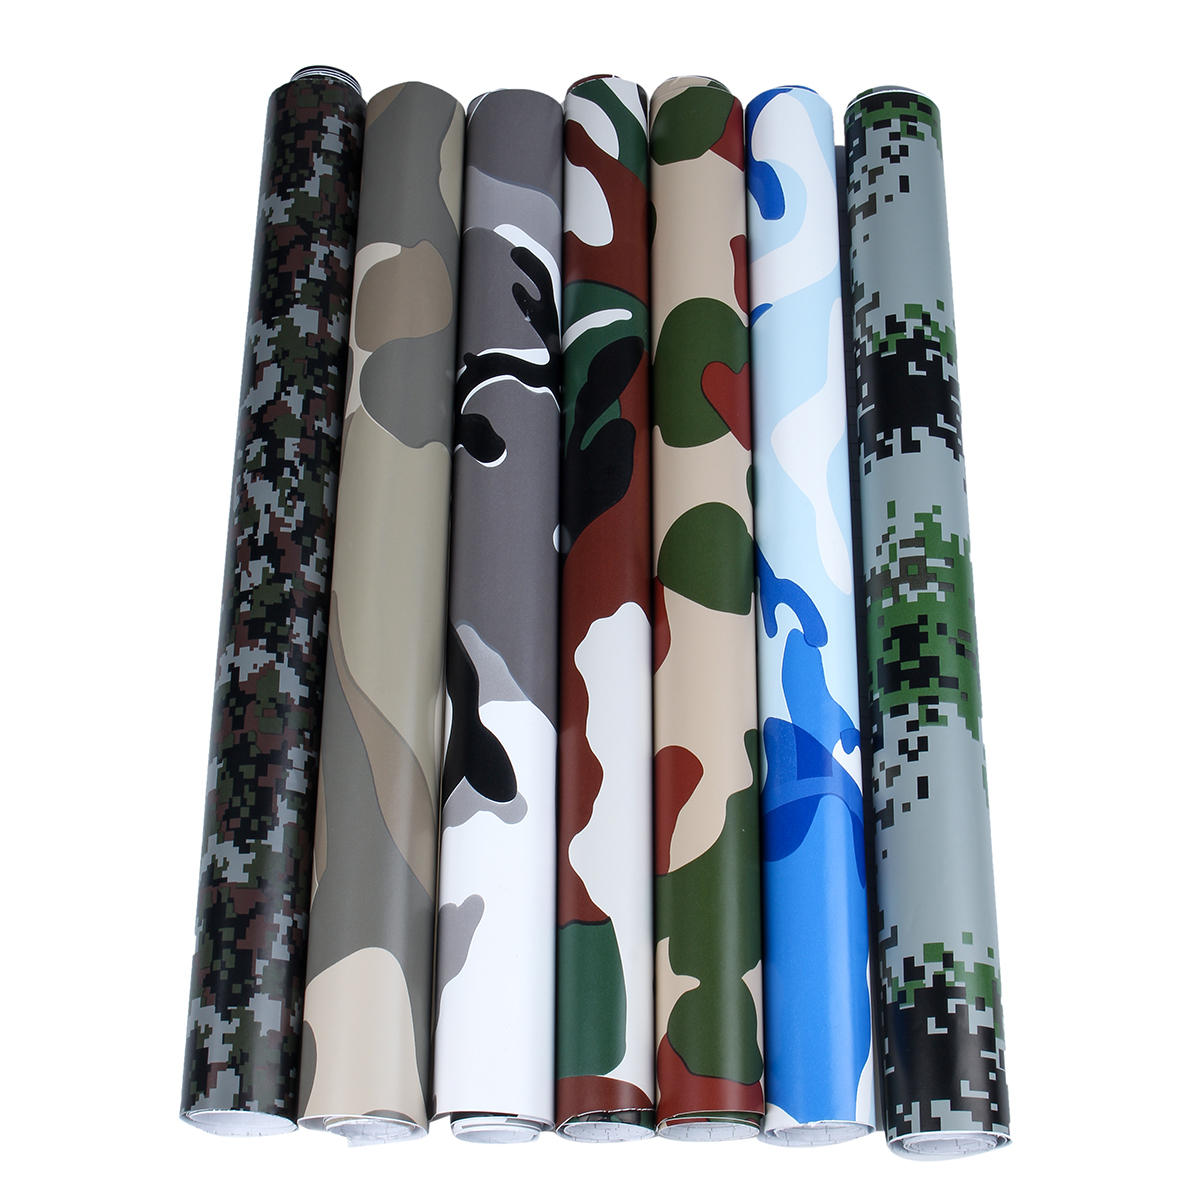 Stickers DIY Styling Accessories Woodland Green Camouflage Desert For Motorcycle Automobiles Car